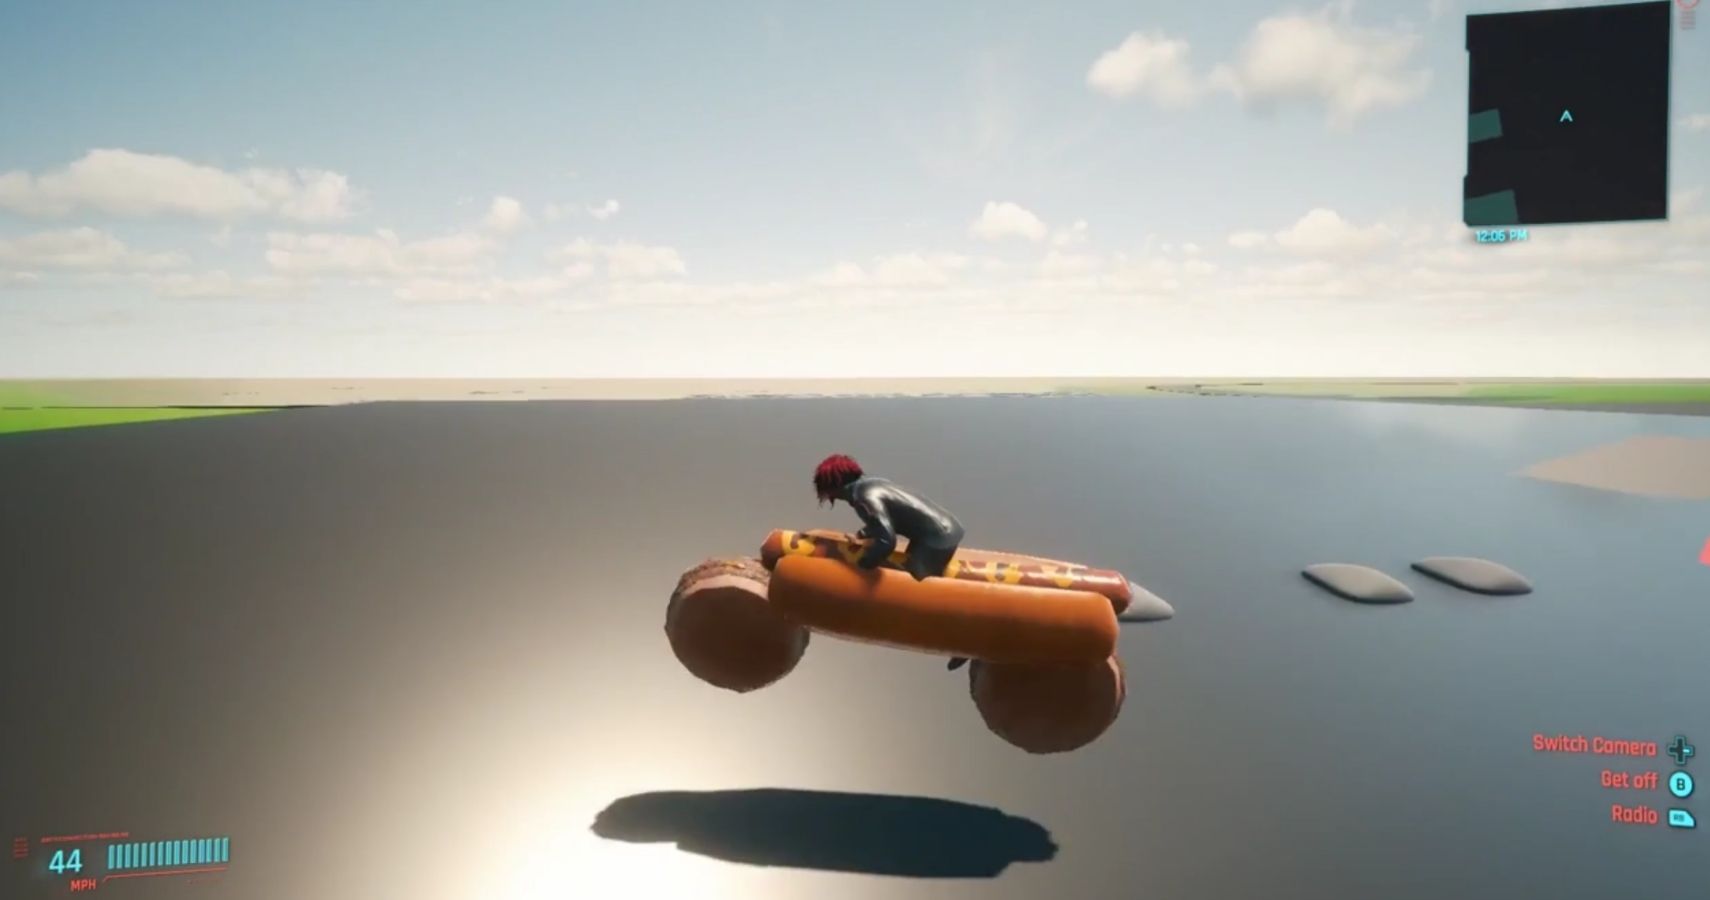 A character rides a hot dog bike in an empty game world